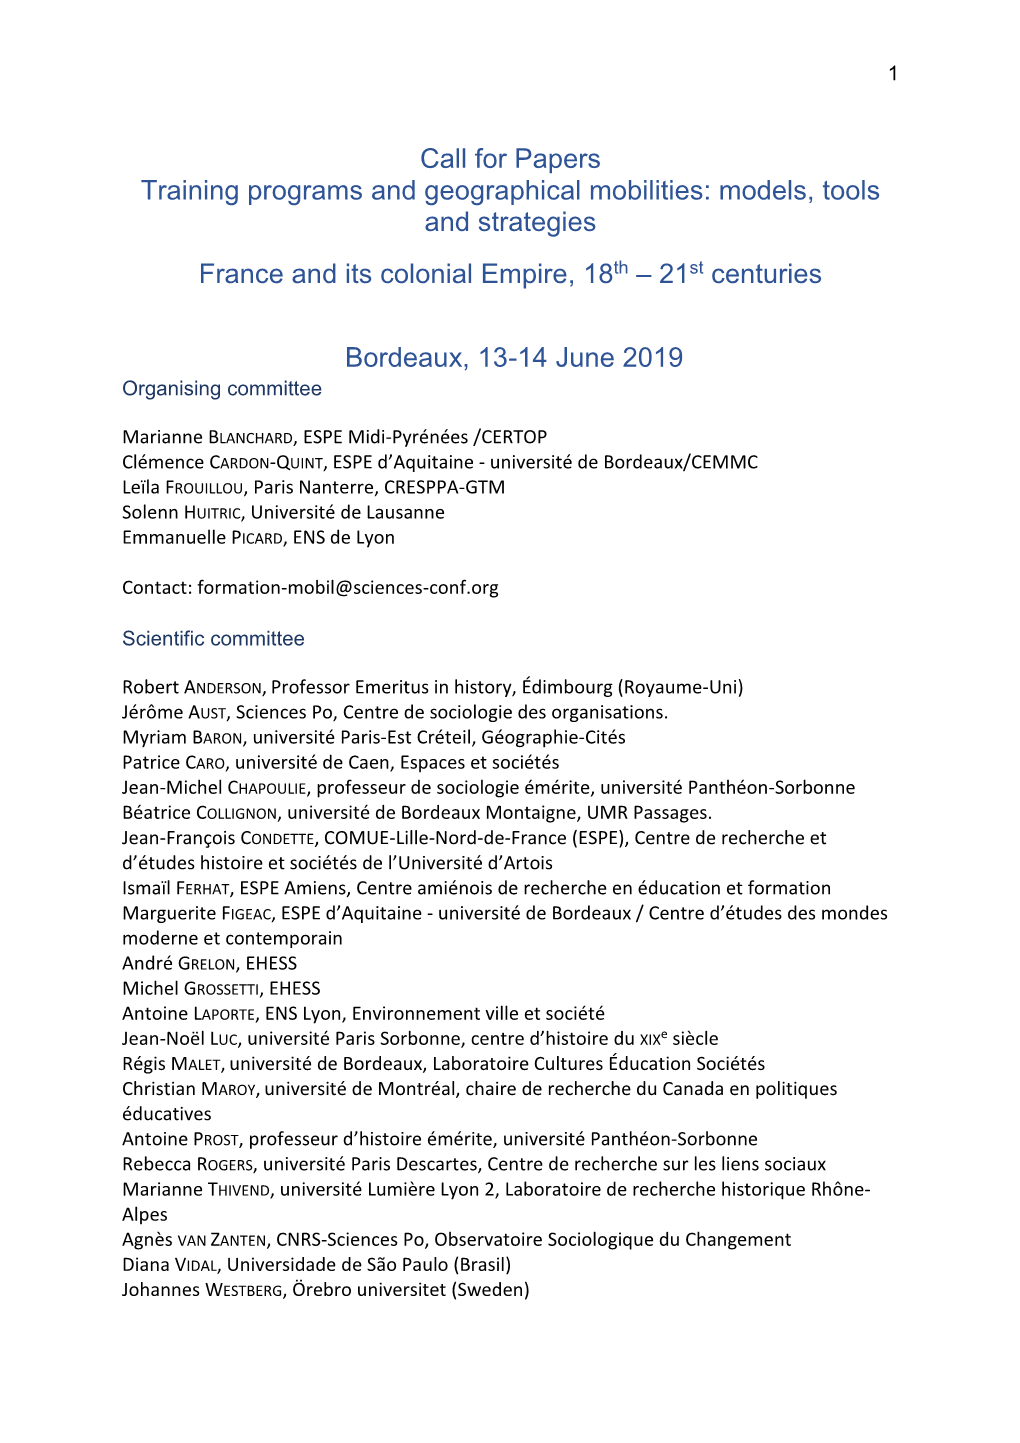 Call for Papers Training Programs and Geographical Mobilities: Models, Tools and Strategies France and Its Colonial Empire, 18Th – 21St Centuries